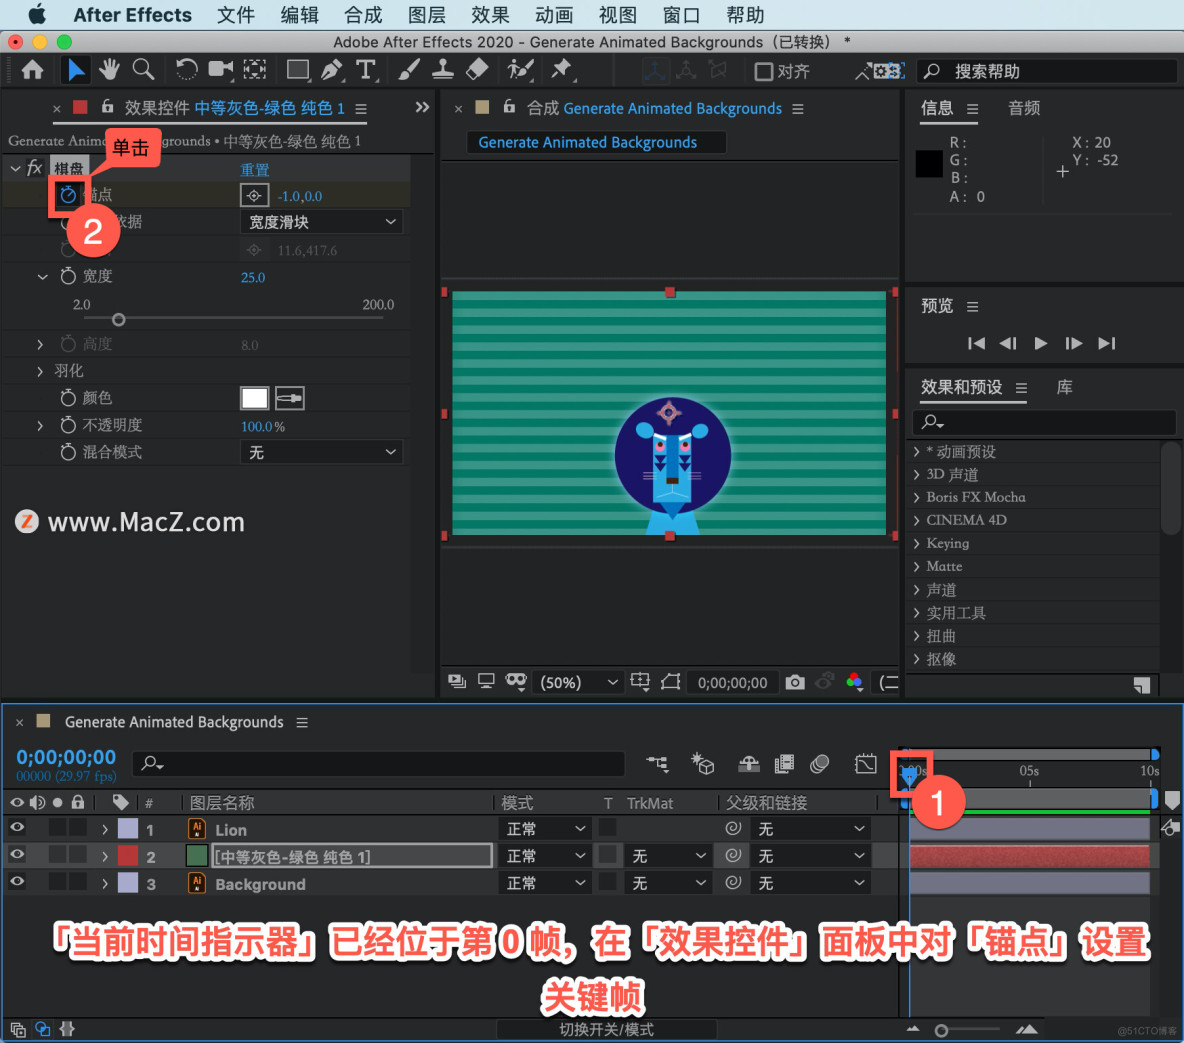 After Effects 教程，如何在 After Effects 中给条纹背景添加动画效果？_AE